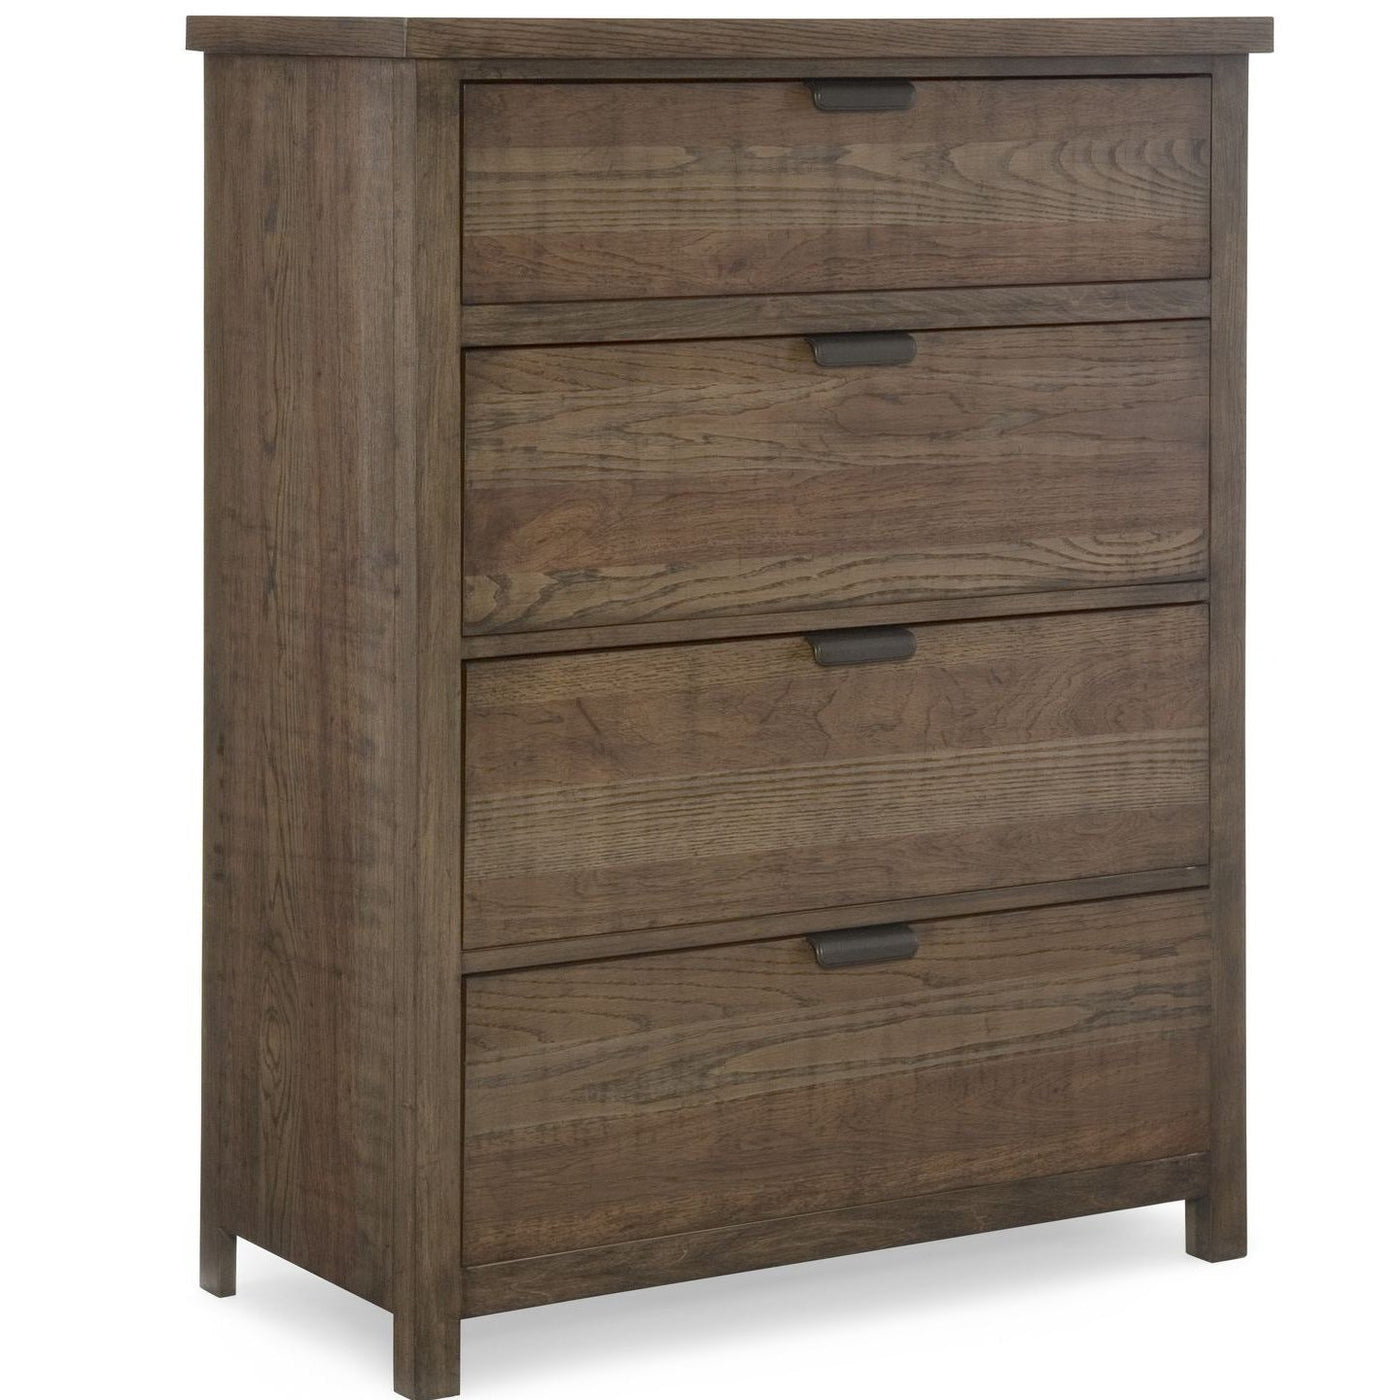 Legacy Classic Kids Fulton County Drawer Ches